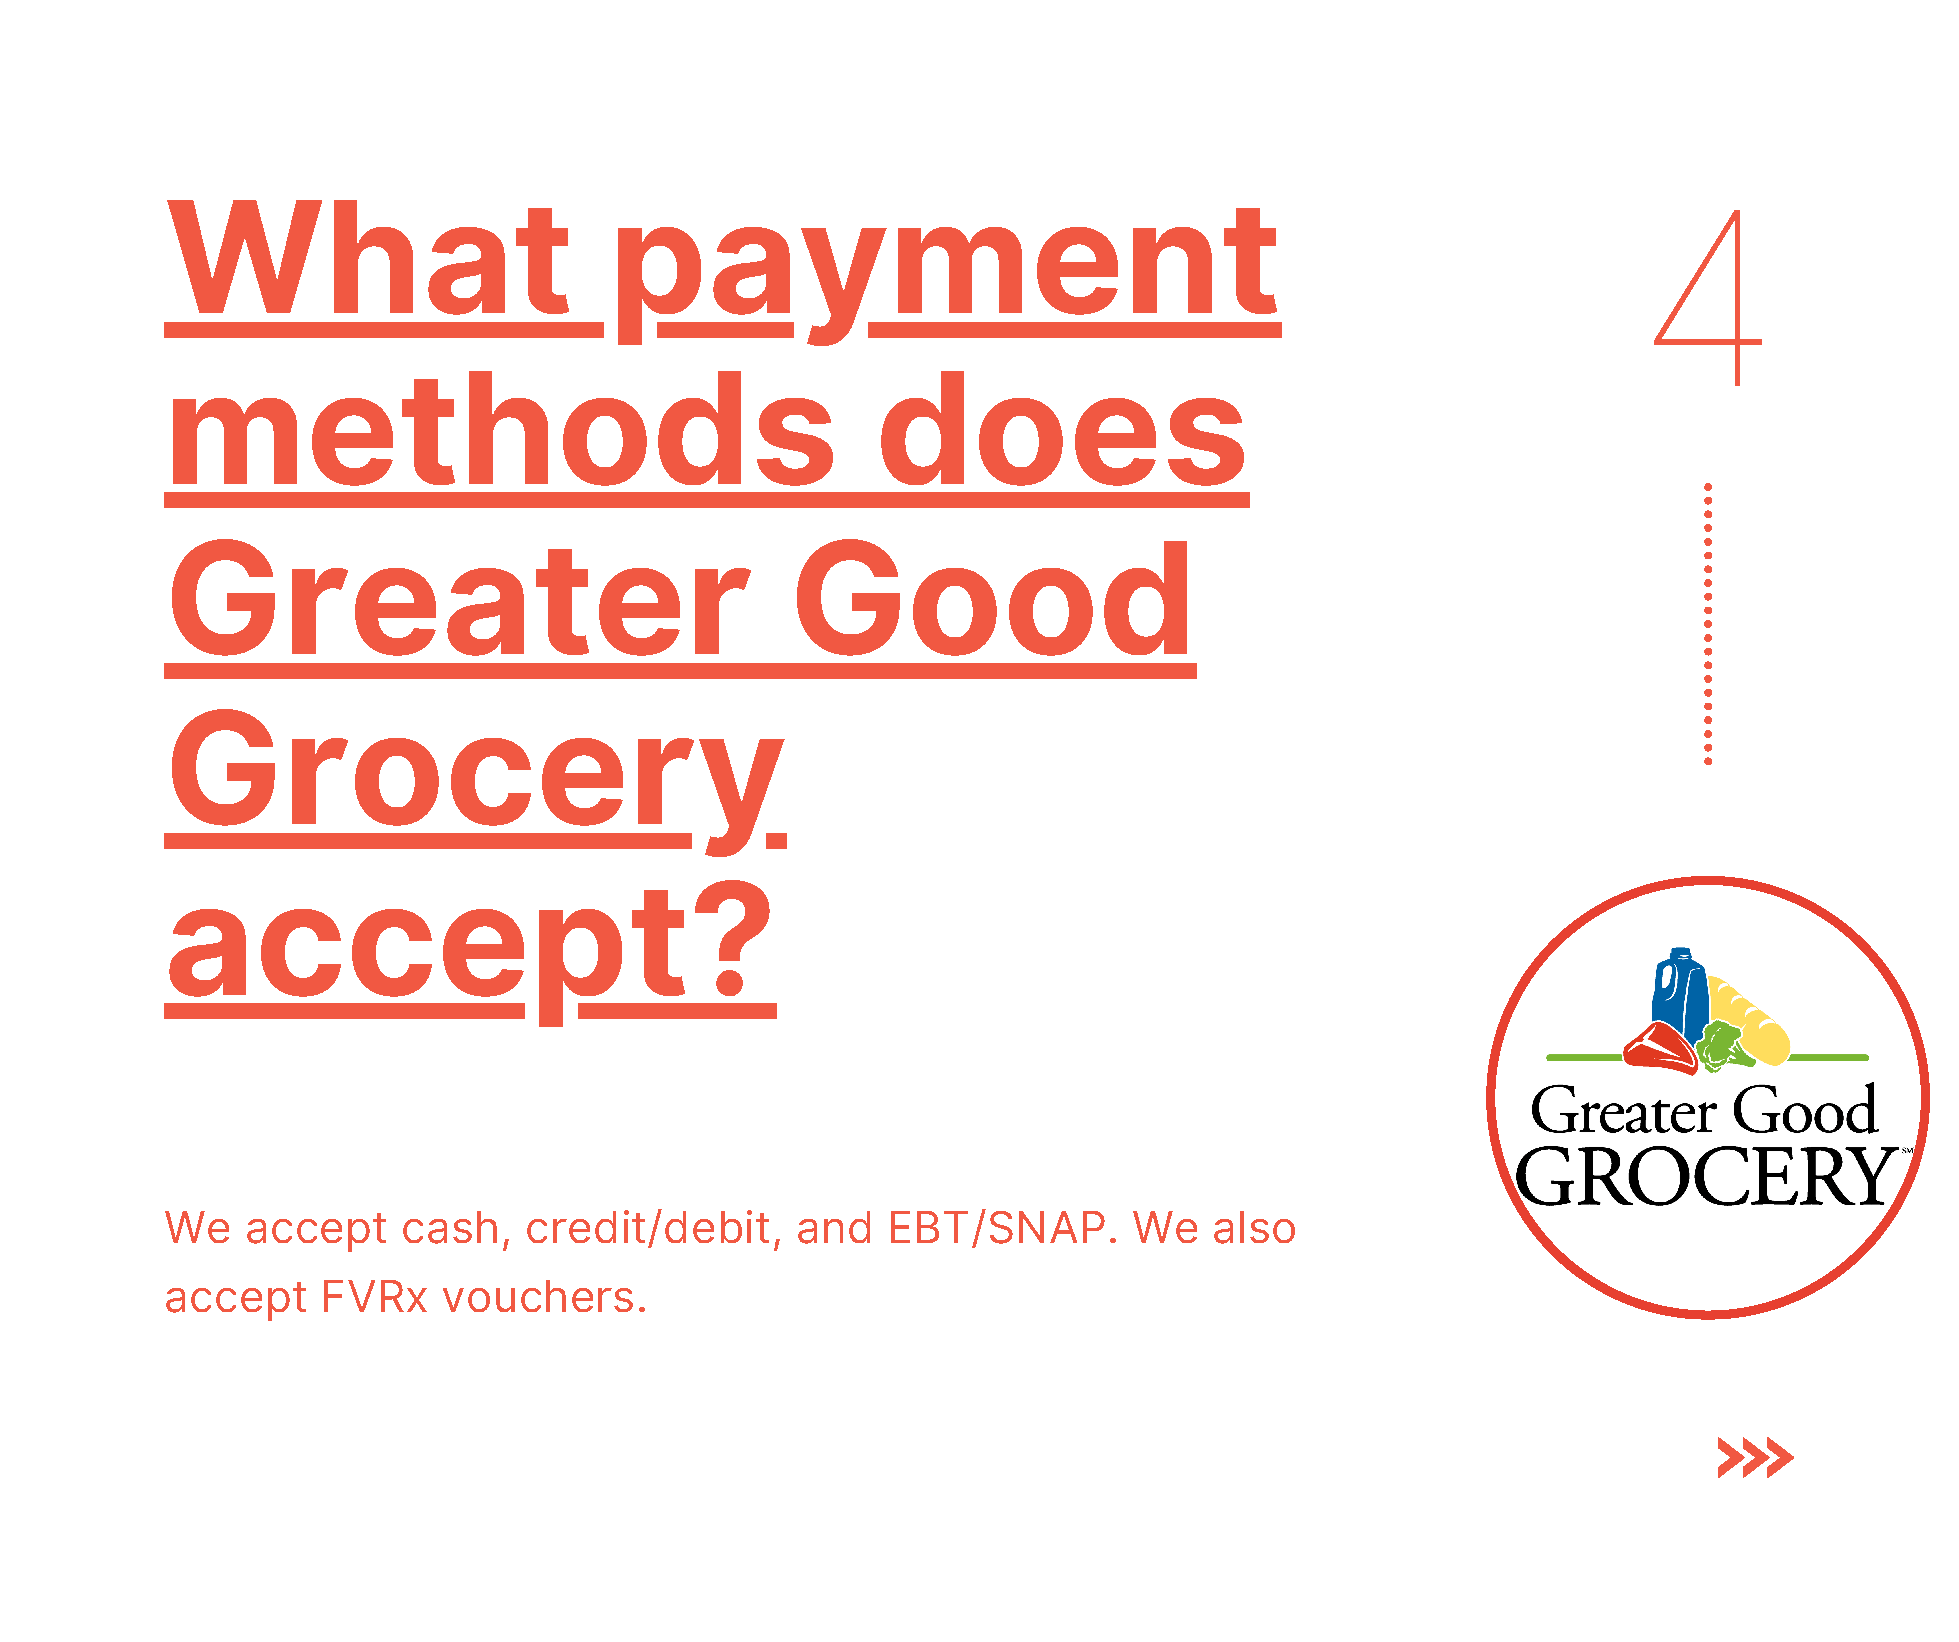 Greater Good Grocery